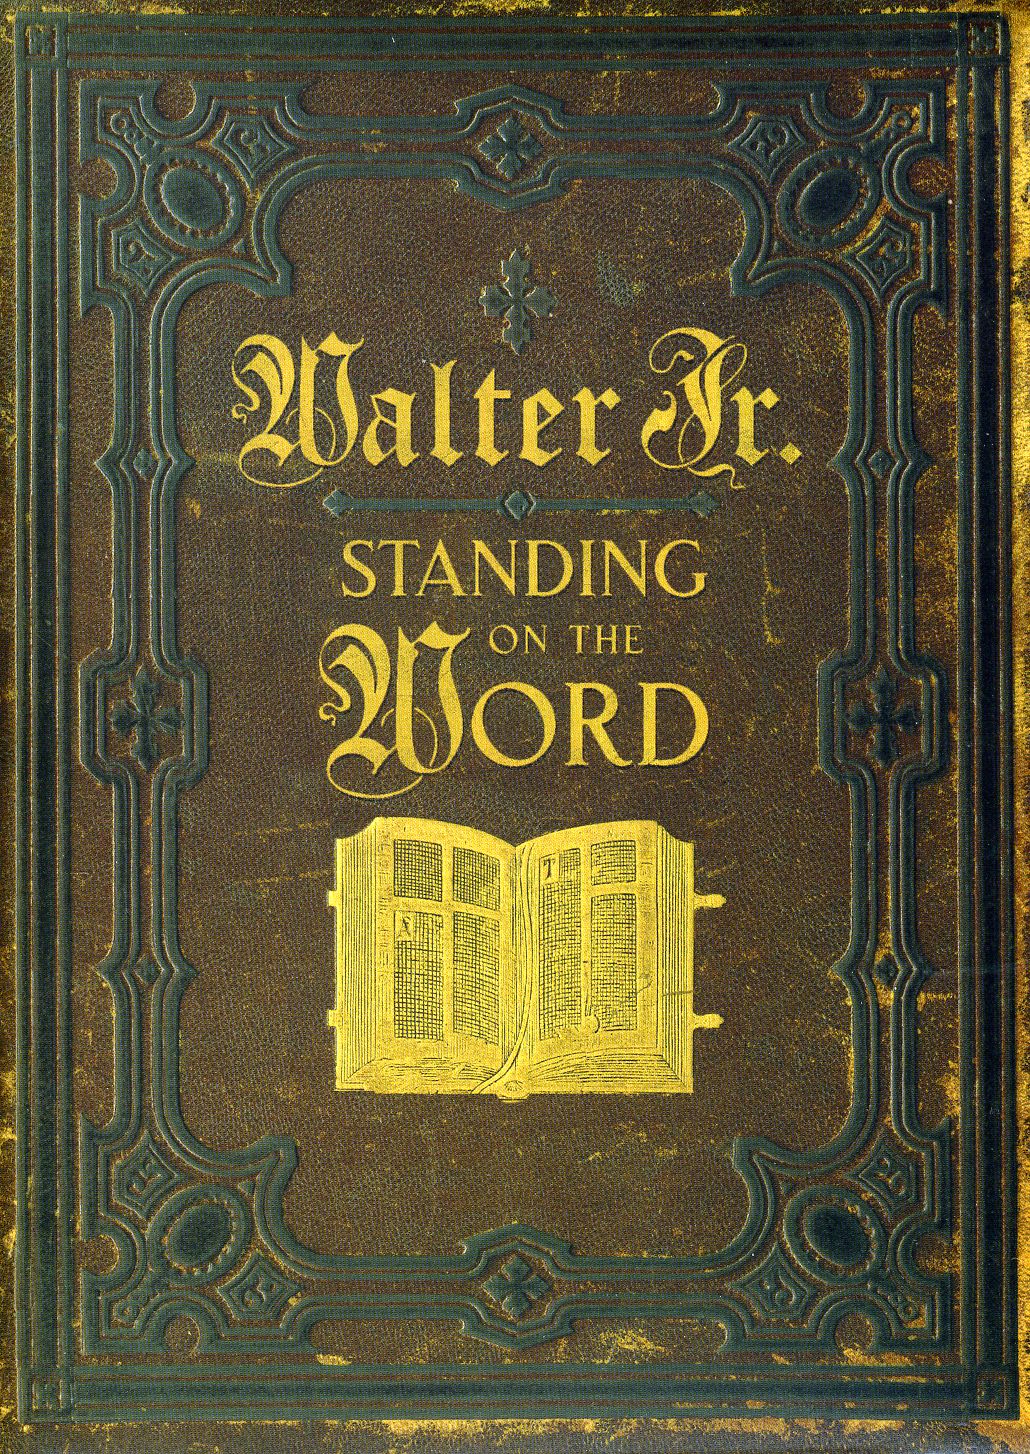 STANDING ON THE WORD